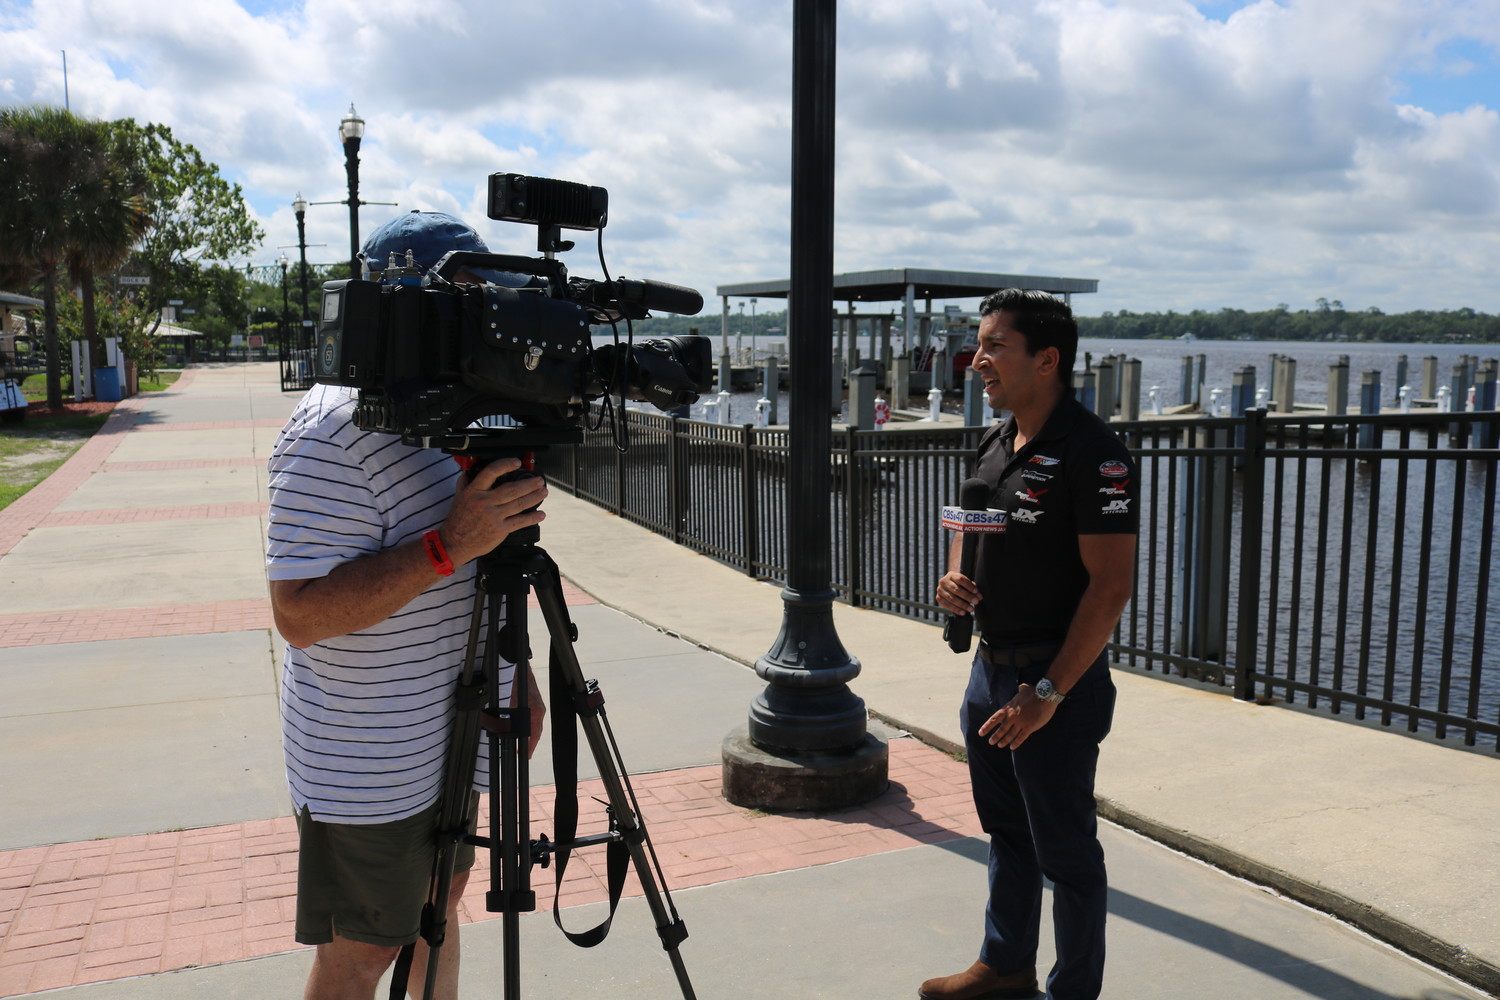 Powerboat P1 CEO Azam Rangoonwala answers questions from a local media outlet.